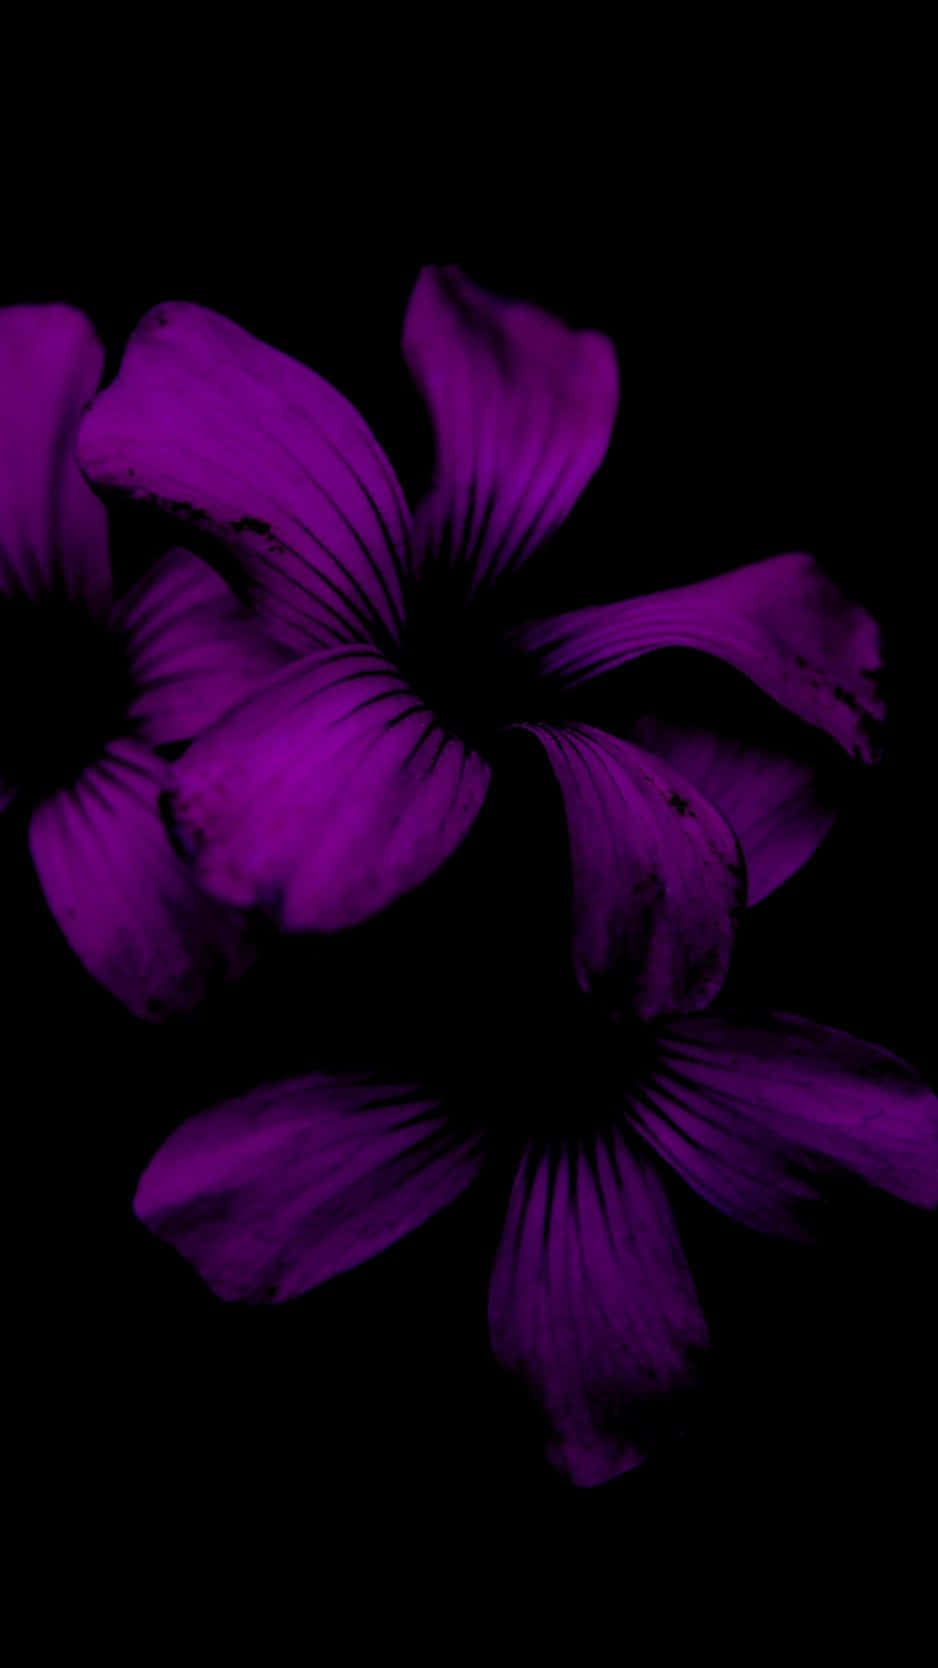 A vibrant flower blooms against the black background of an iPhone.